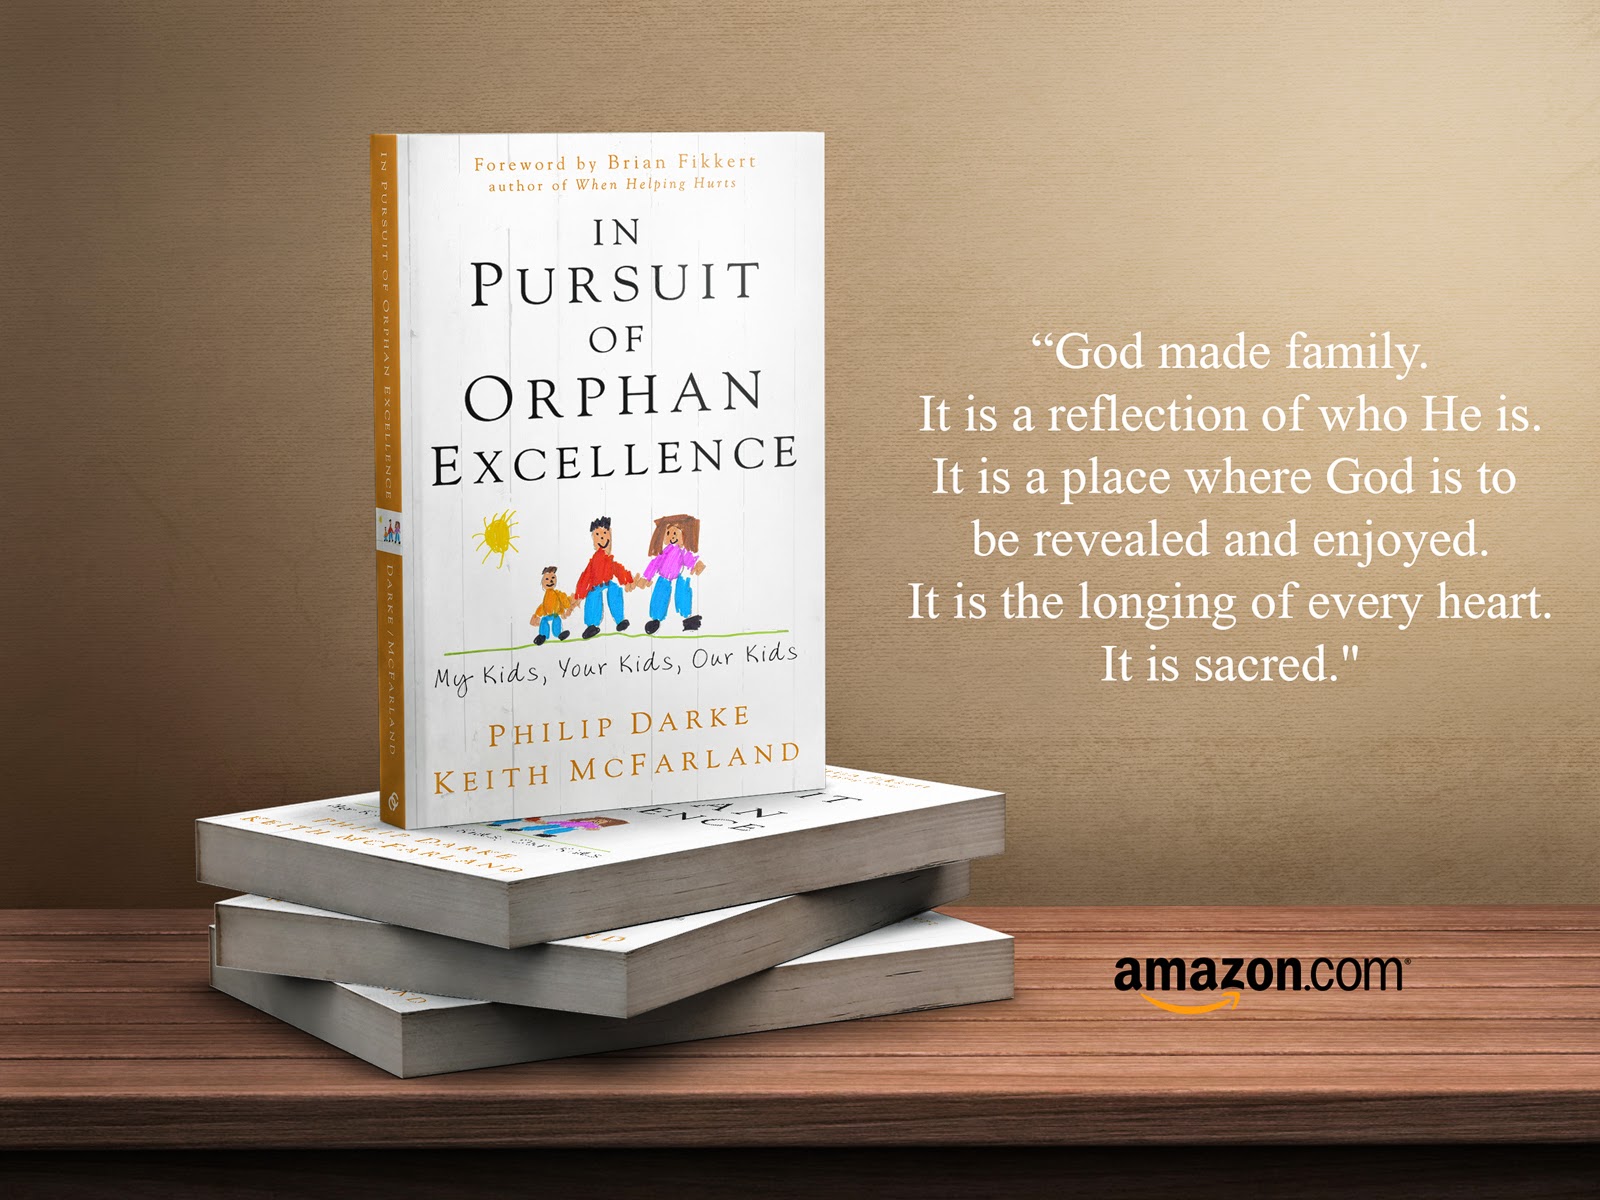 "This is by far the best book on orphan care out there." Dan Cruver, Together For Adoption